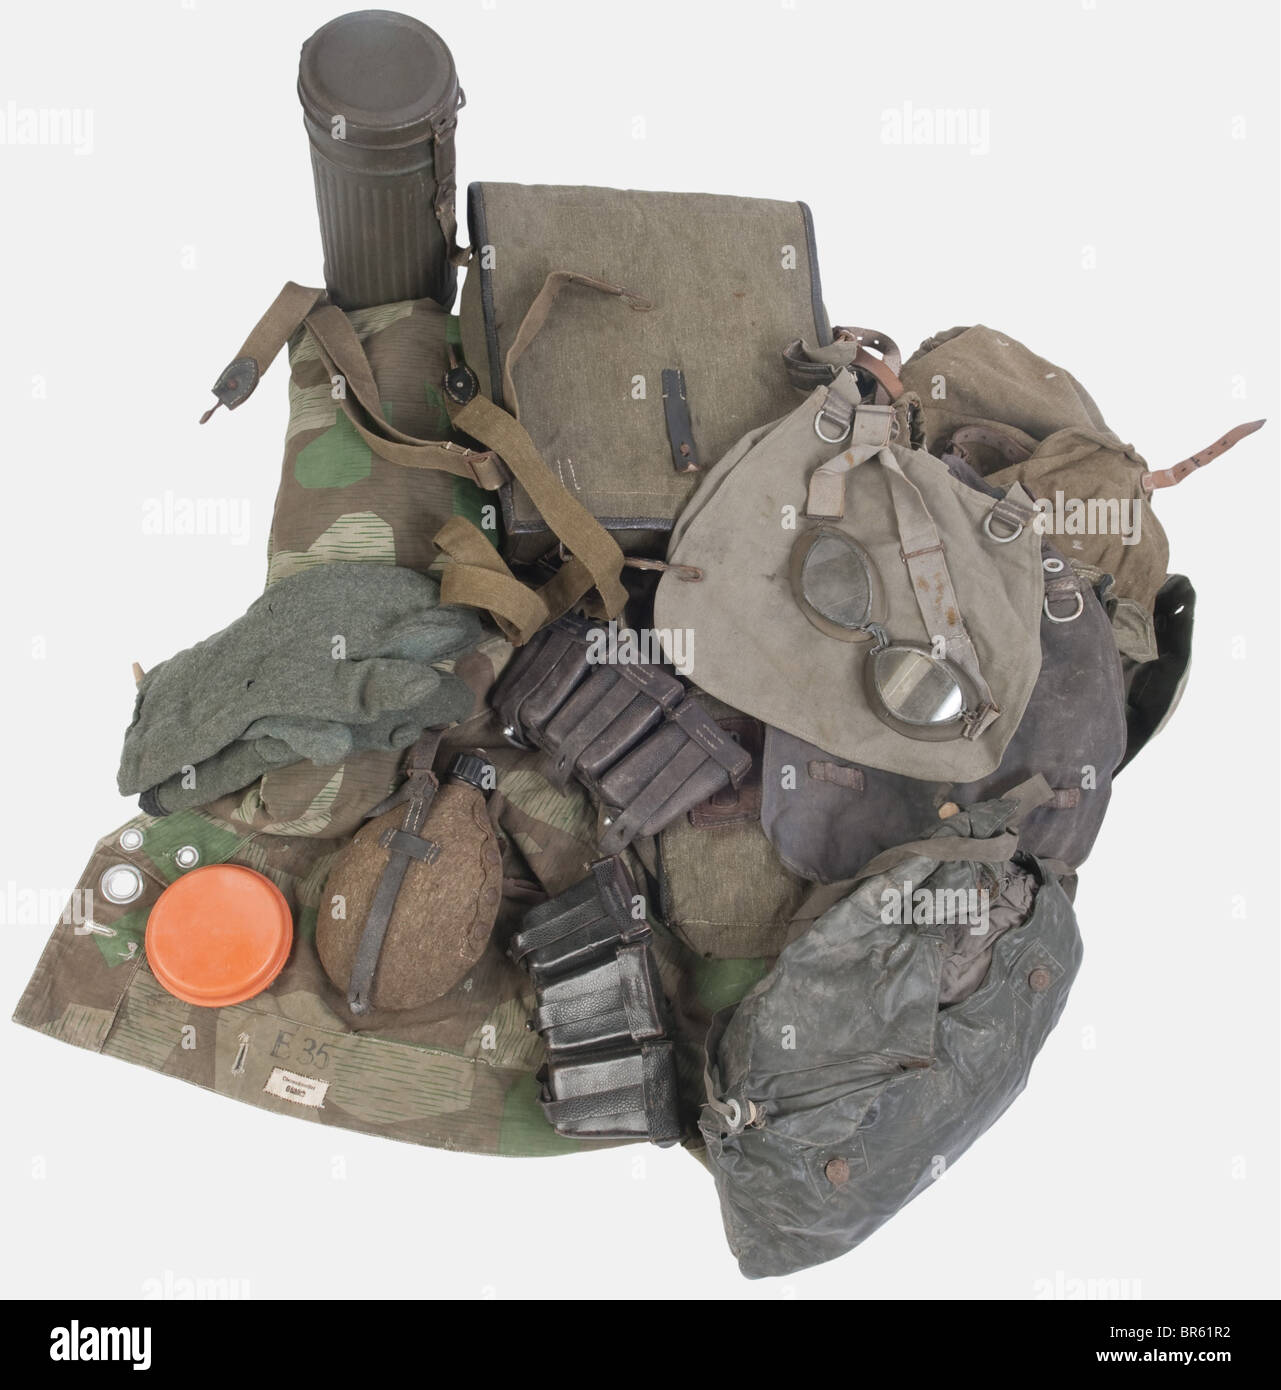 A Group Of Wehrmacht Equipment Banque d'image et photos - Alamy